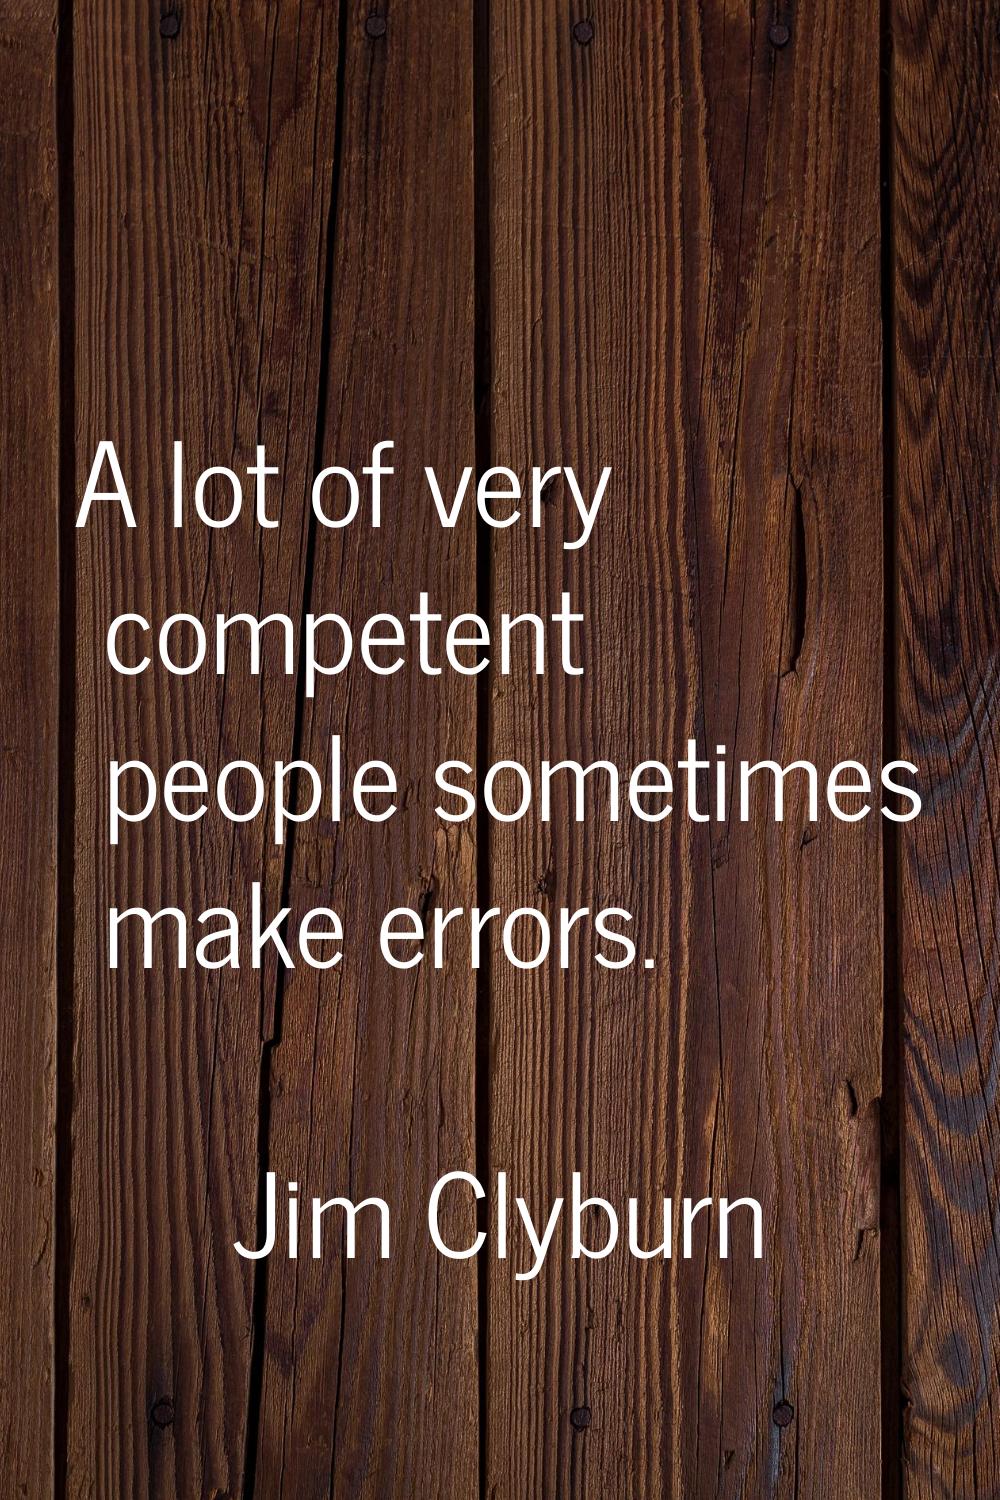 A lot of very competent people sometimes make errors.